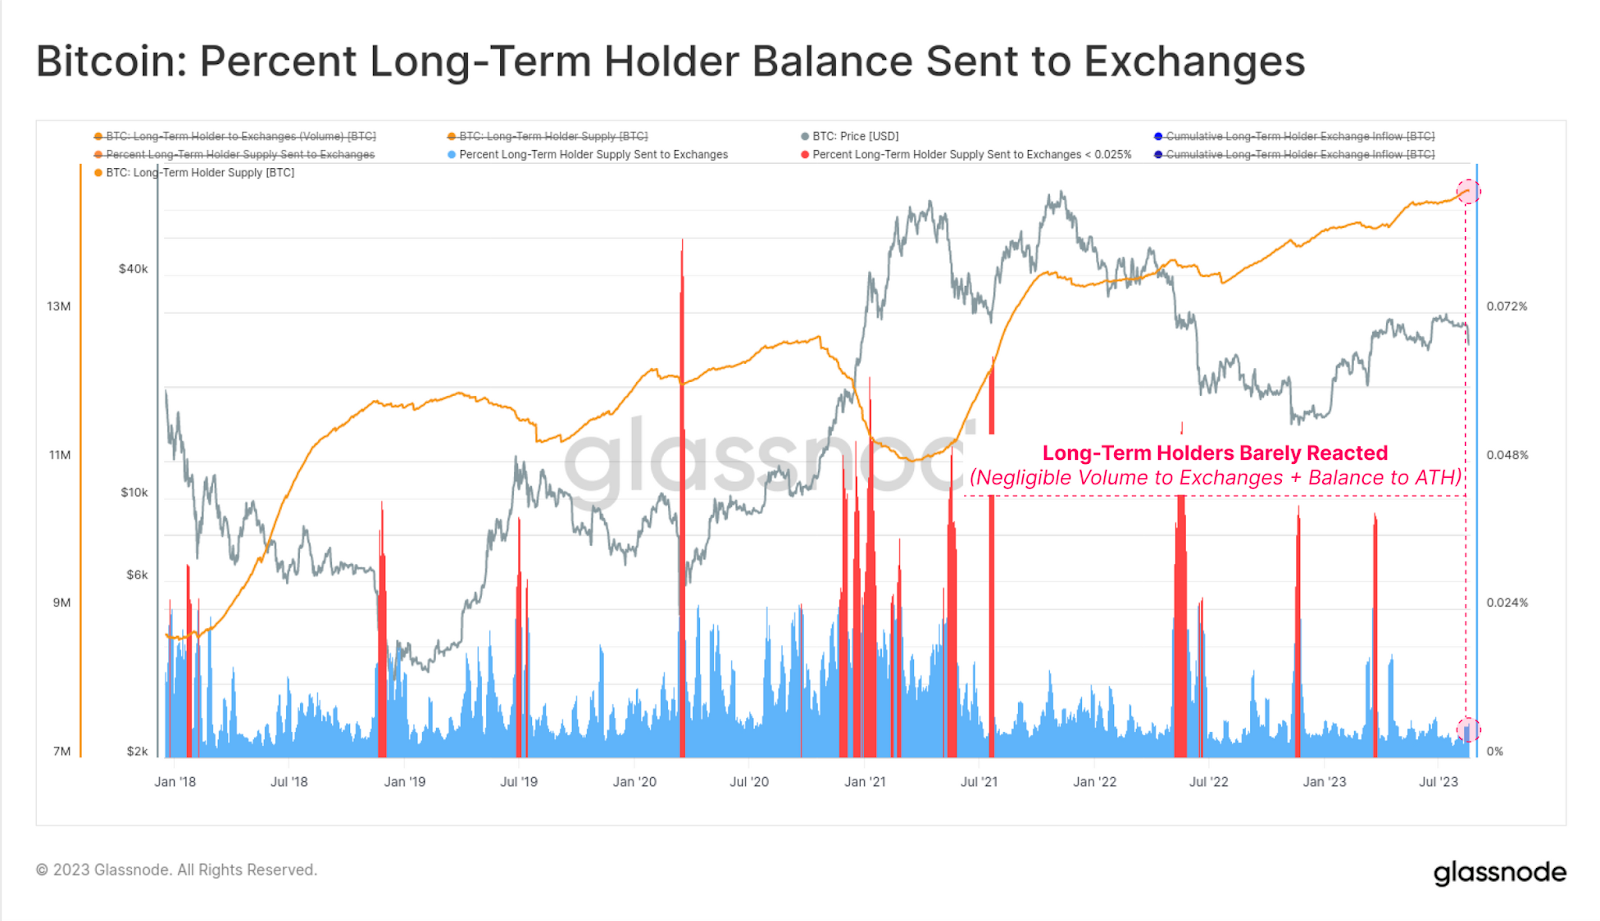 Bitcoin long-term holder balance and exchange inflows data